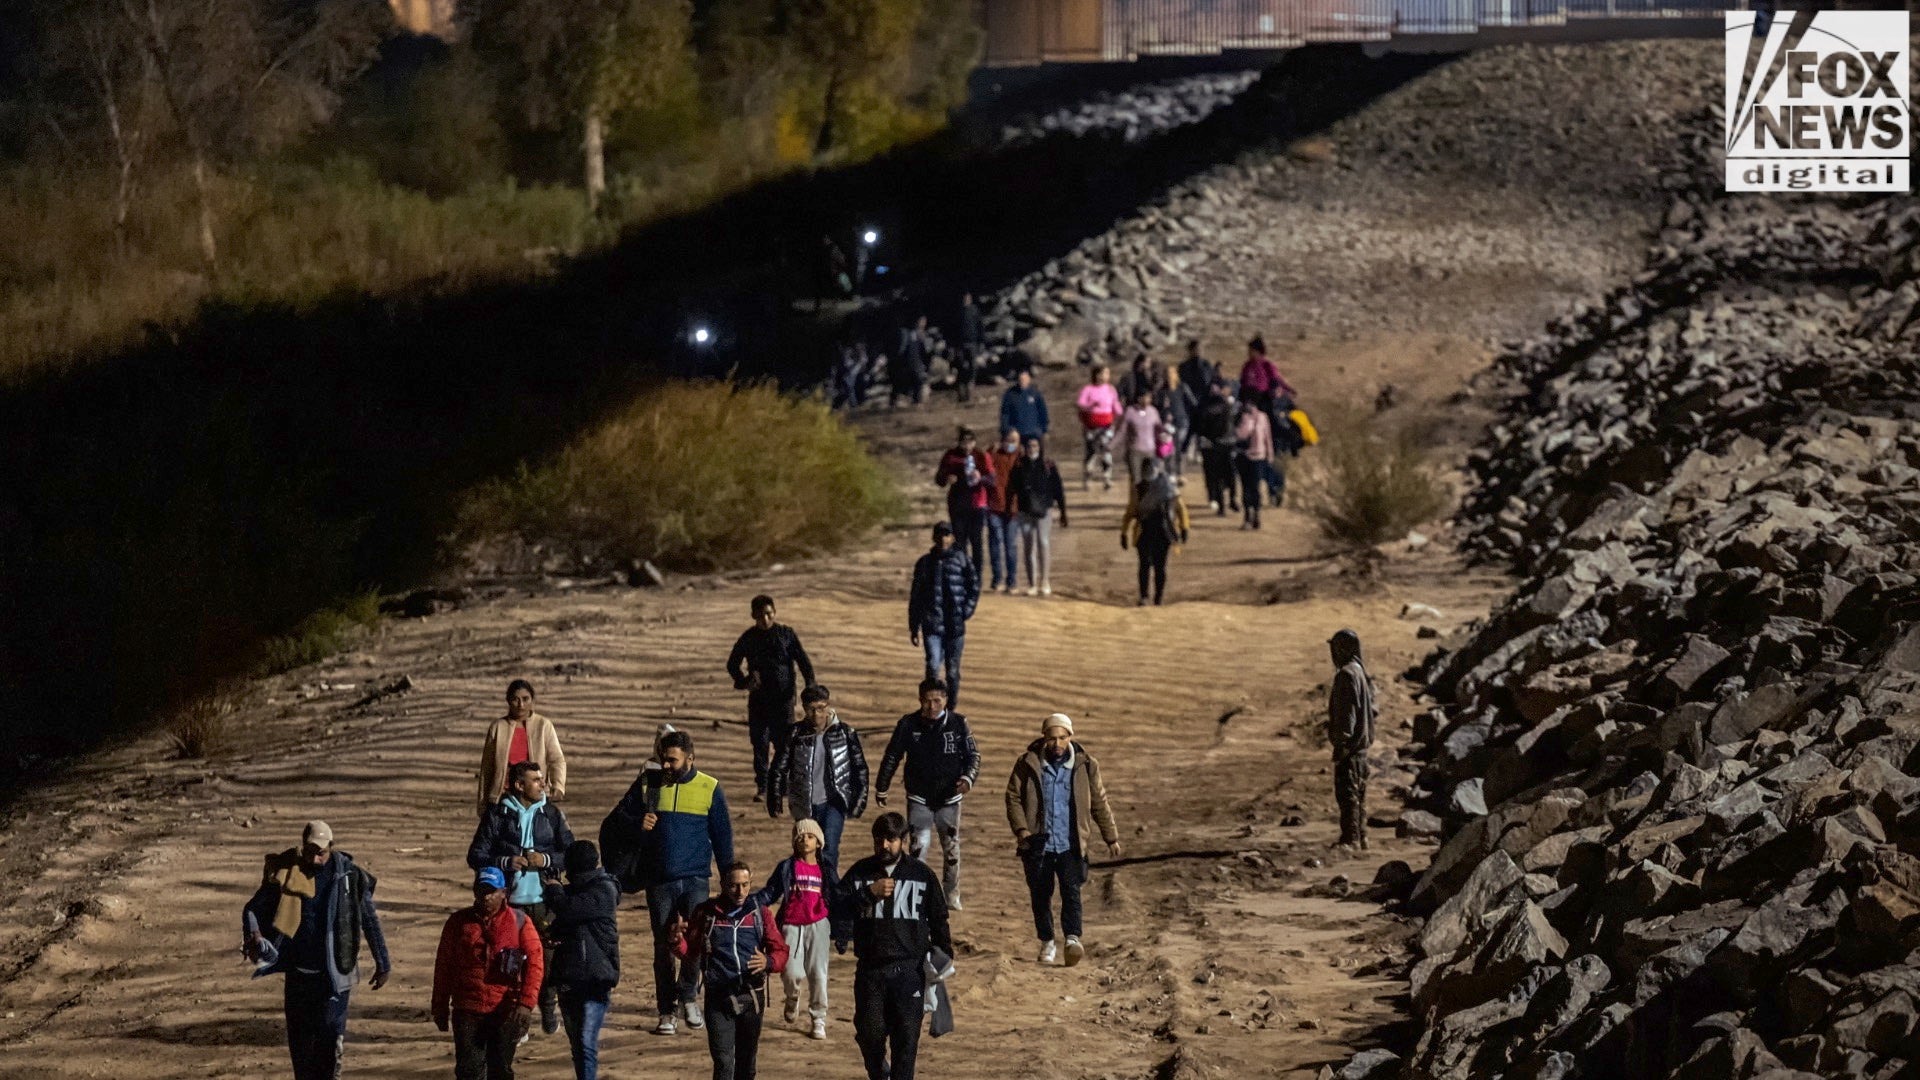 A major border city is on the brink of collapse because of Biden’s immigration policies local official says – Fox News